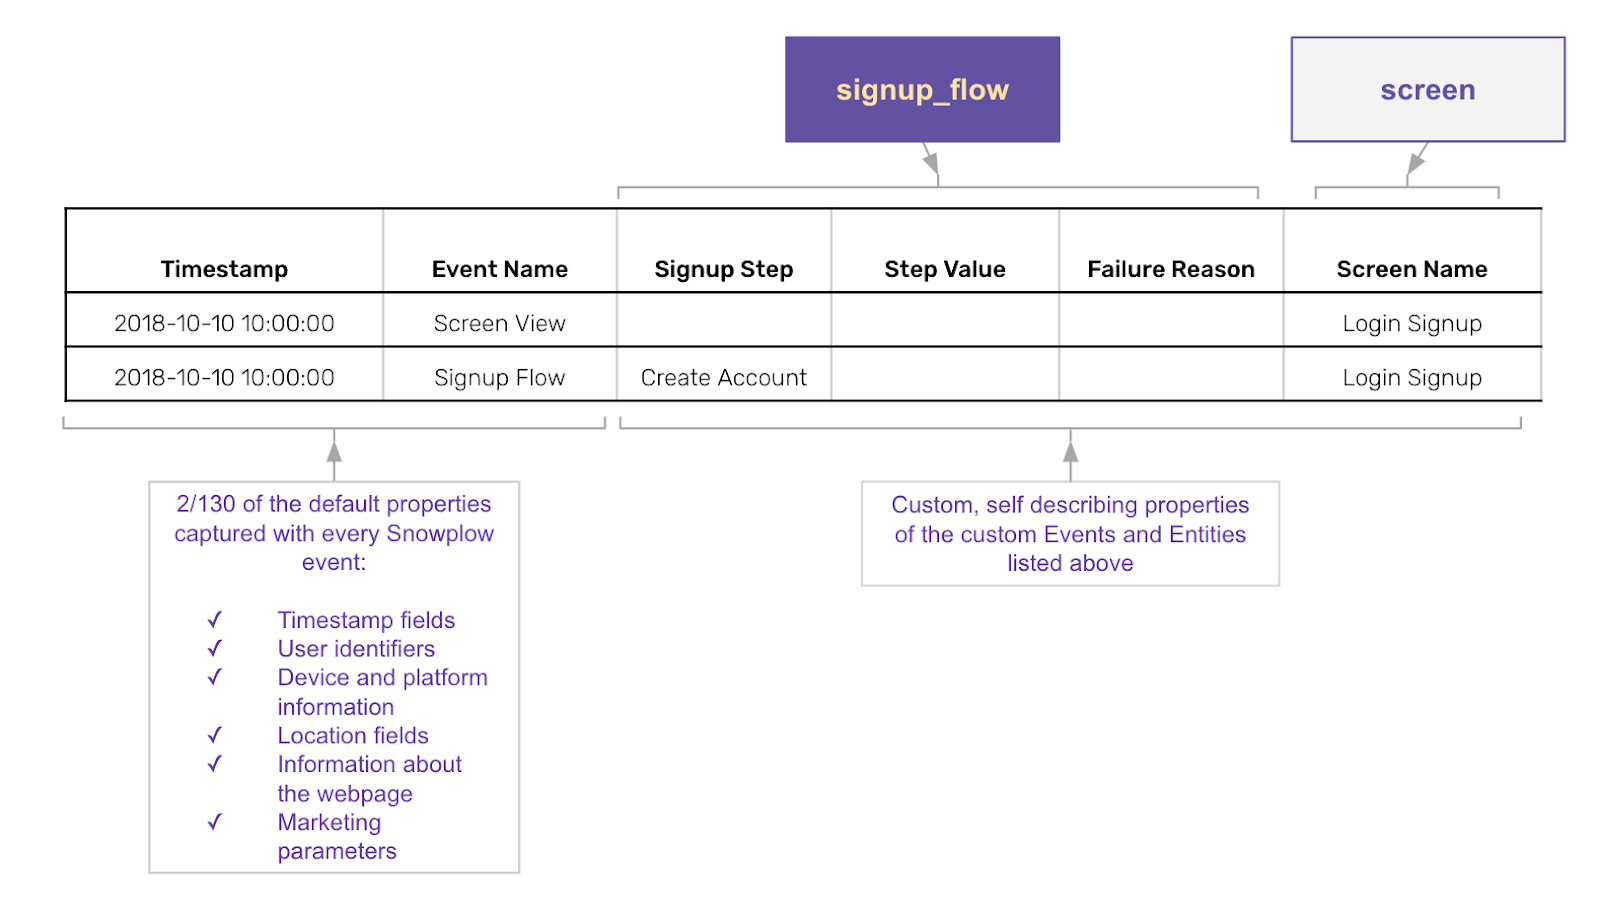 A table of the signup flow